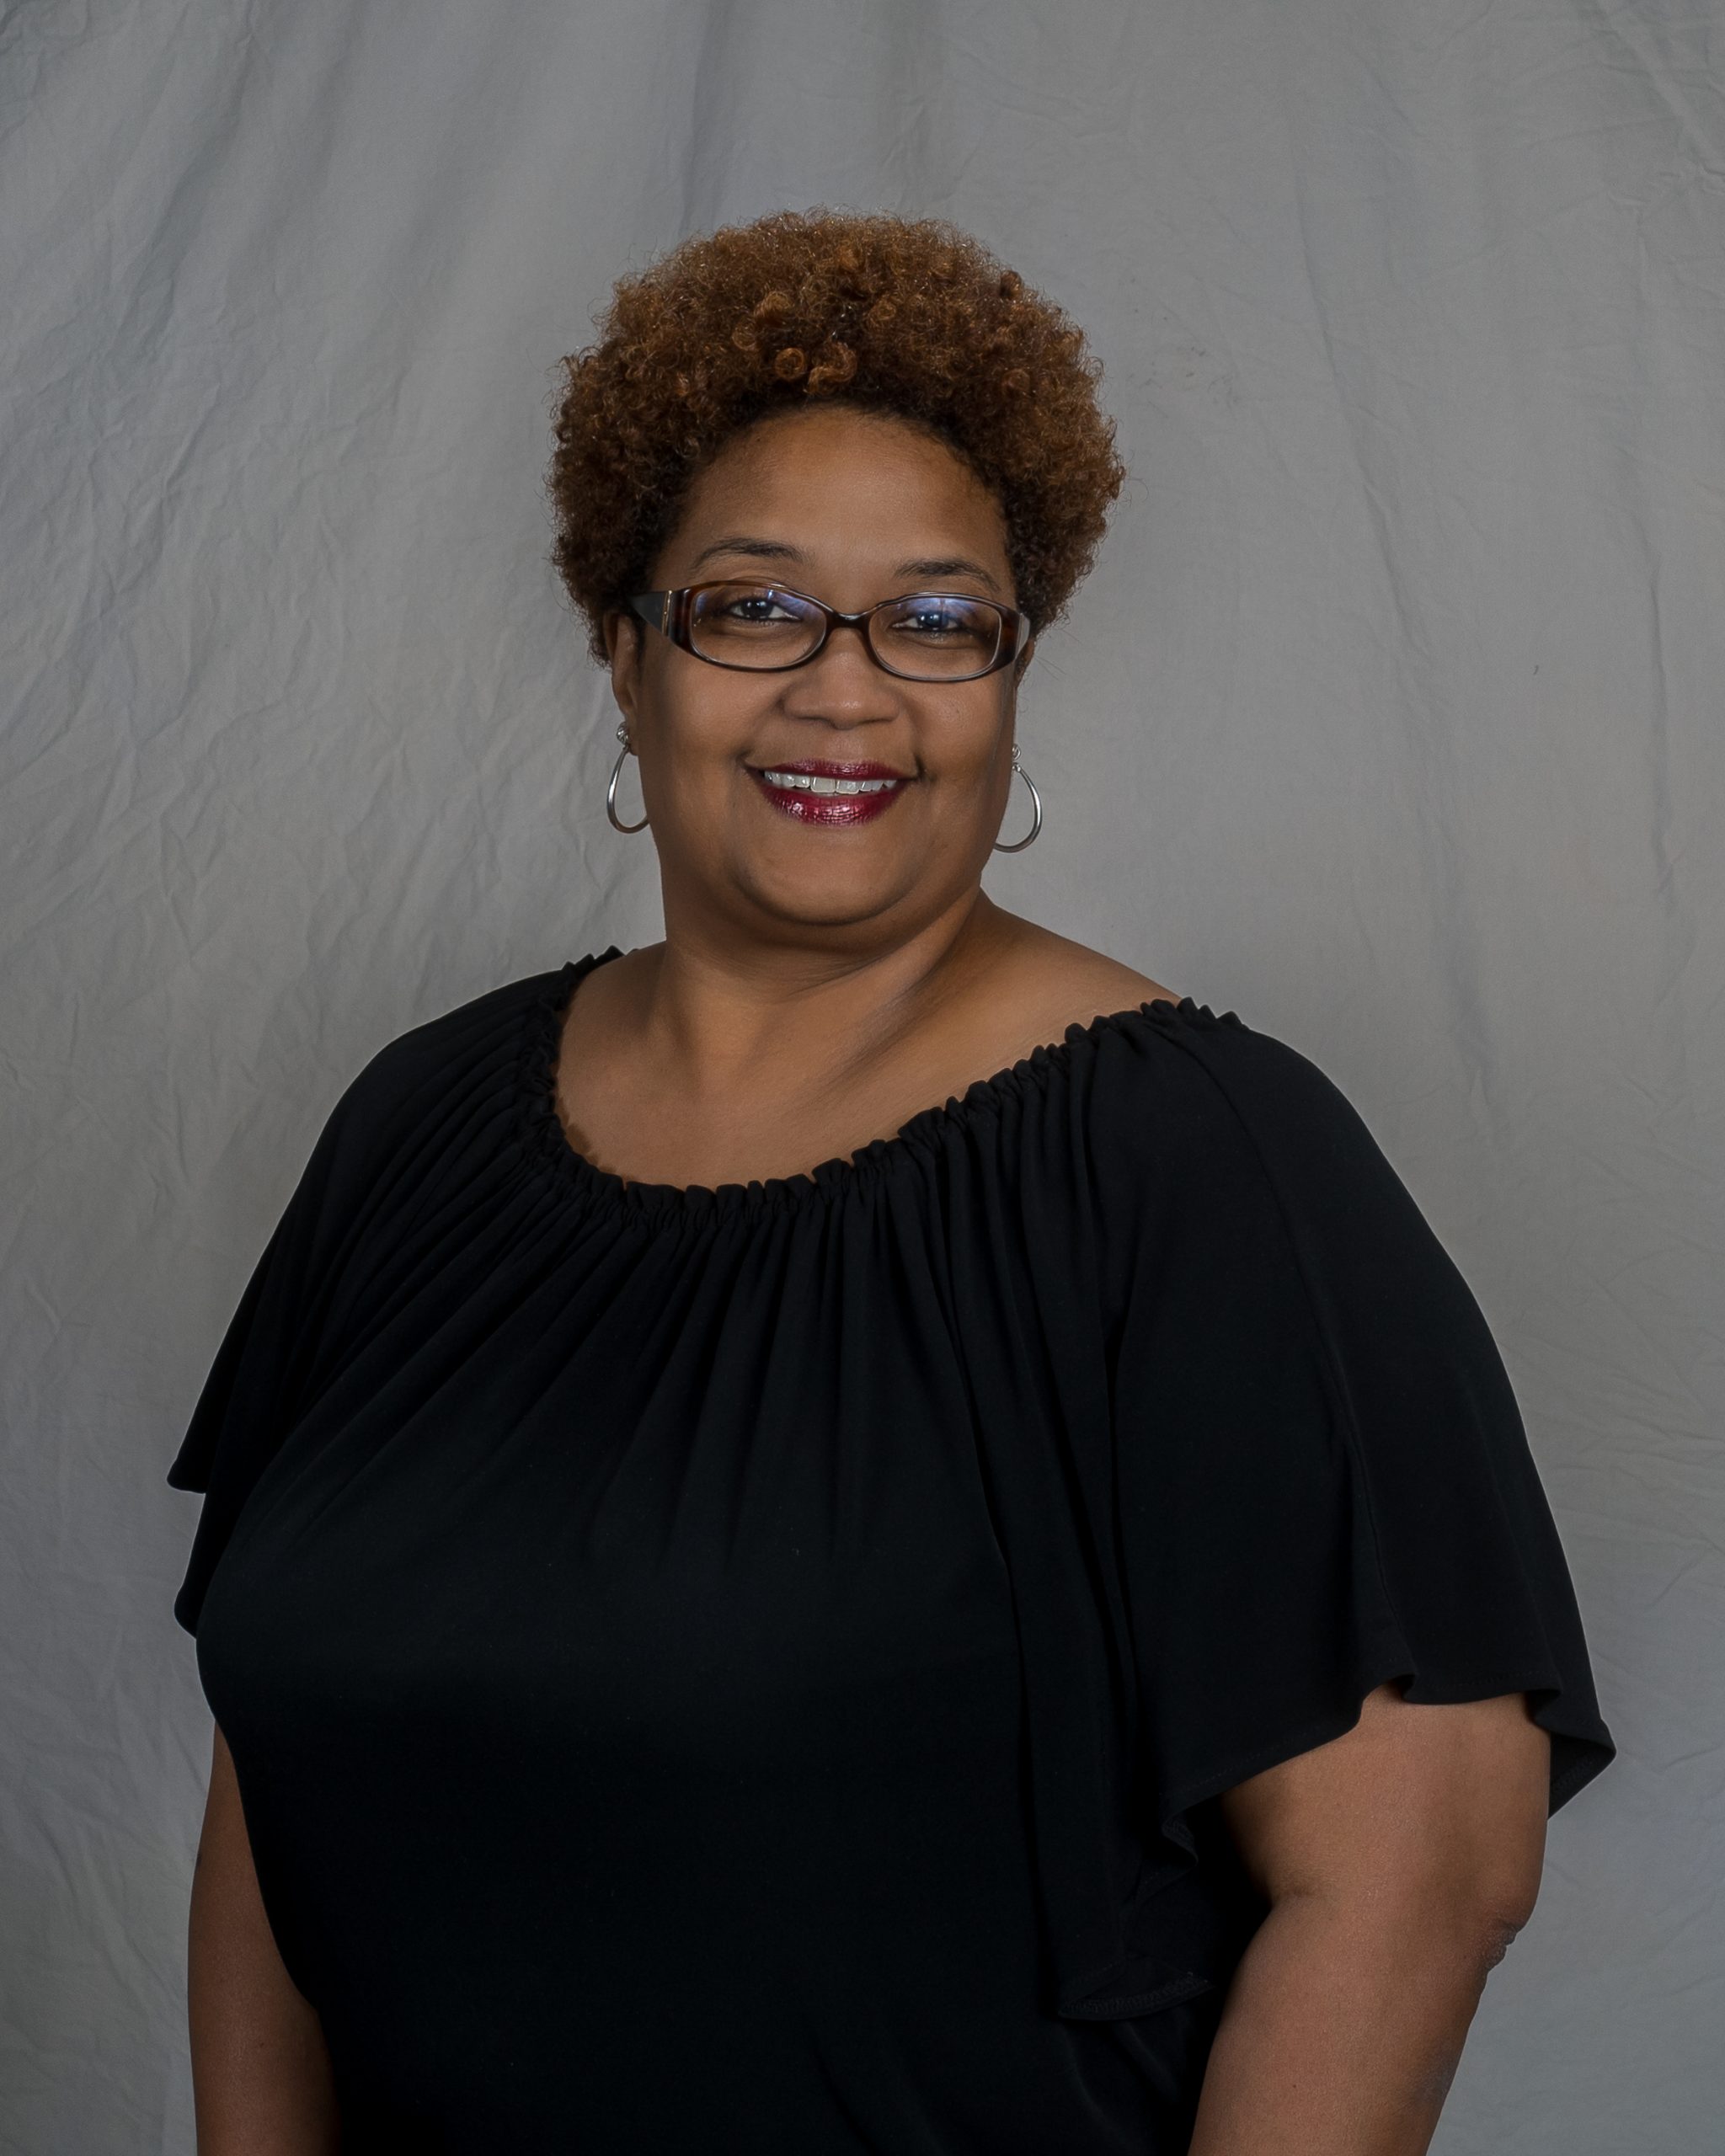 Deniece Shivers – Housing and Facilities Director